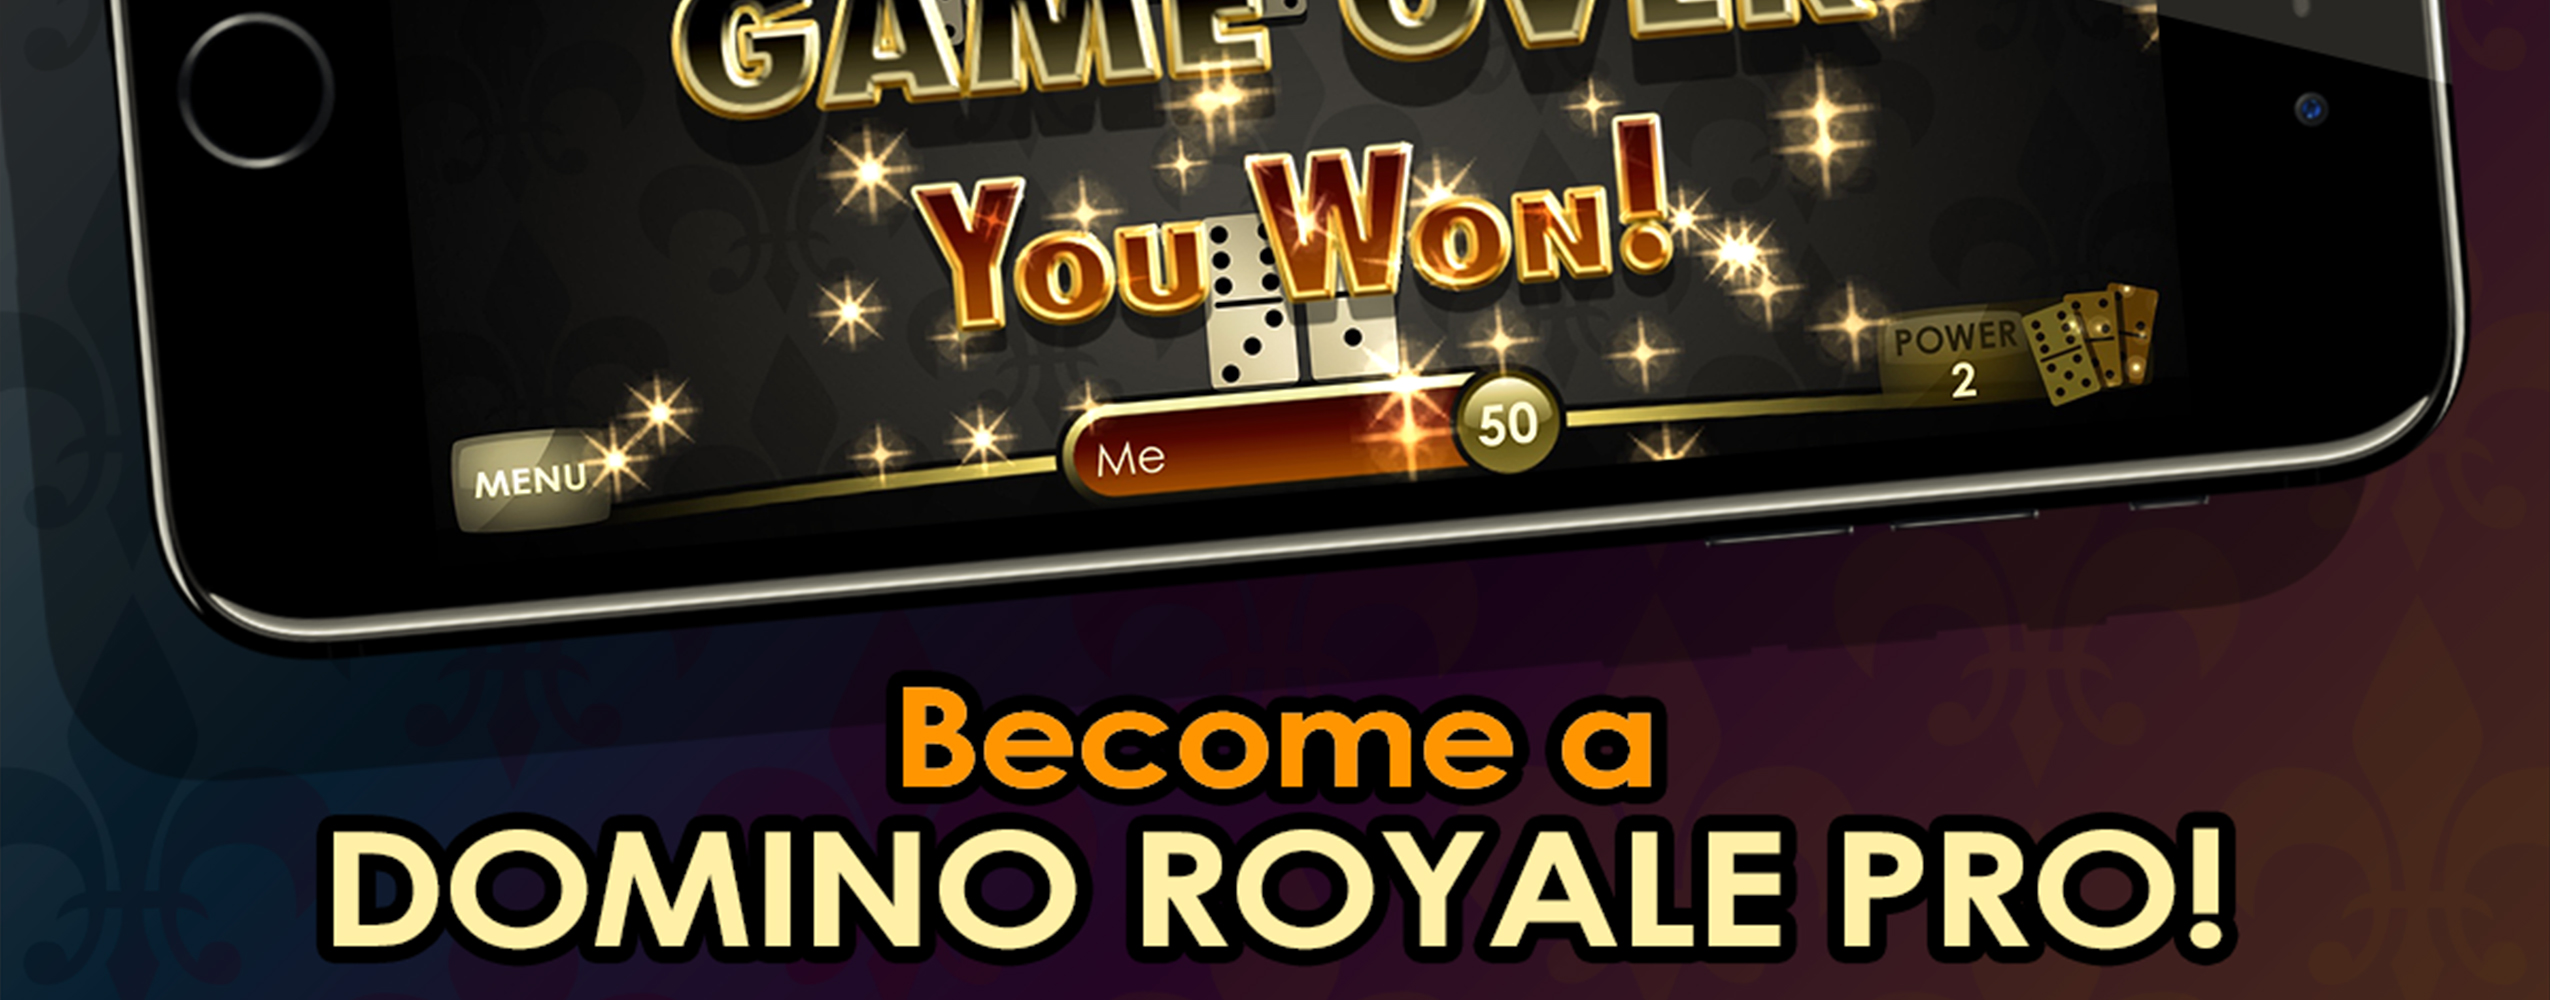 Become a Domino Royale Pro!